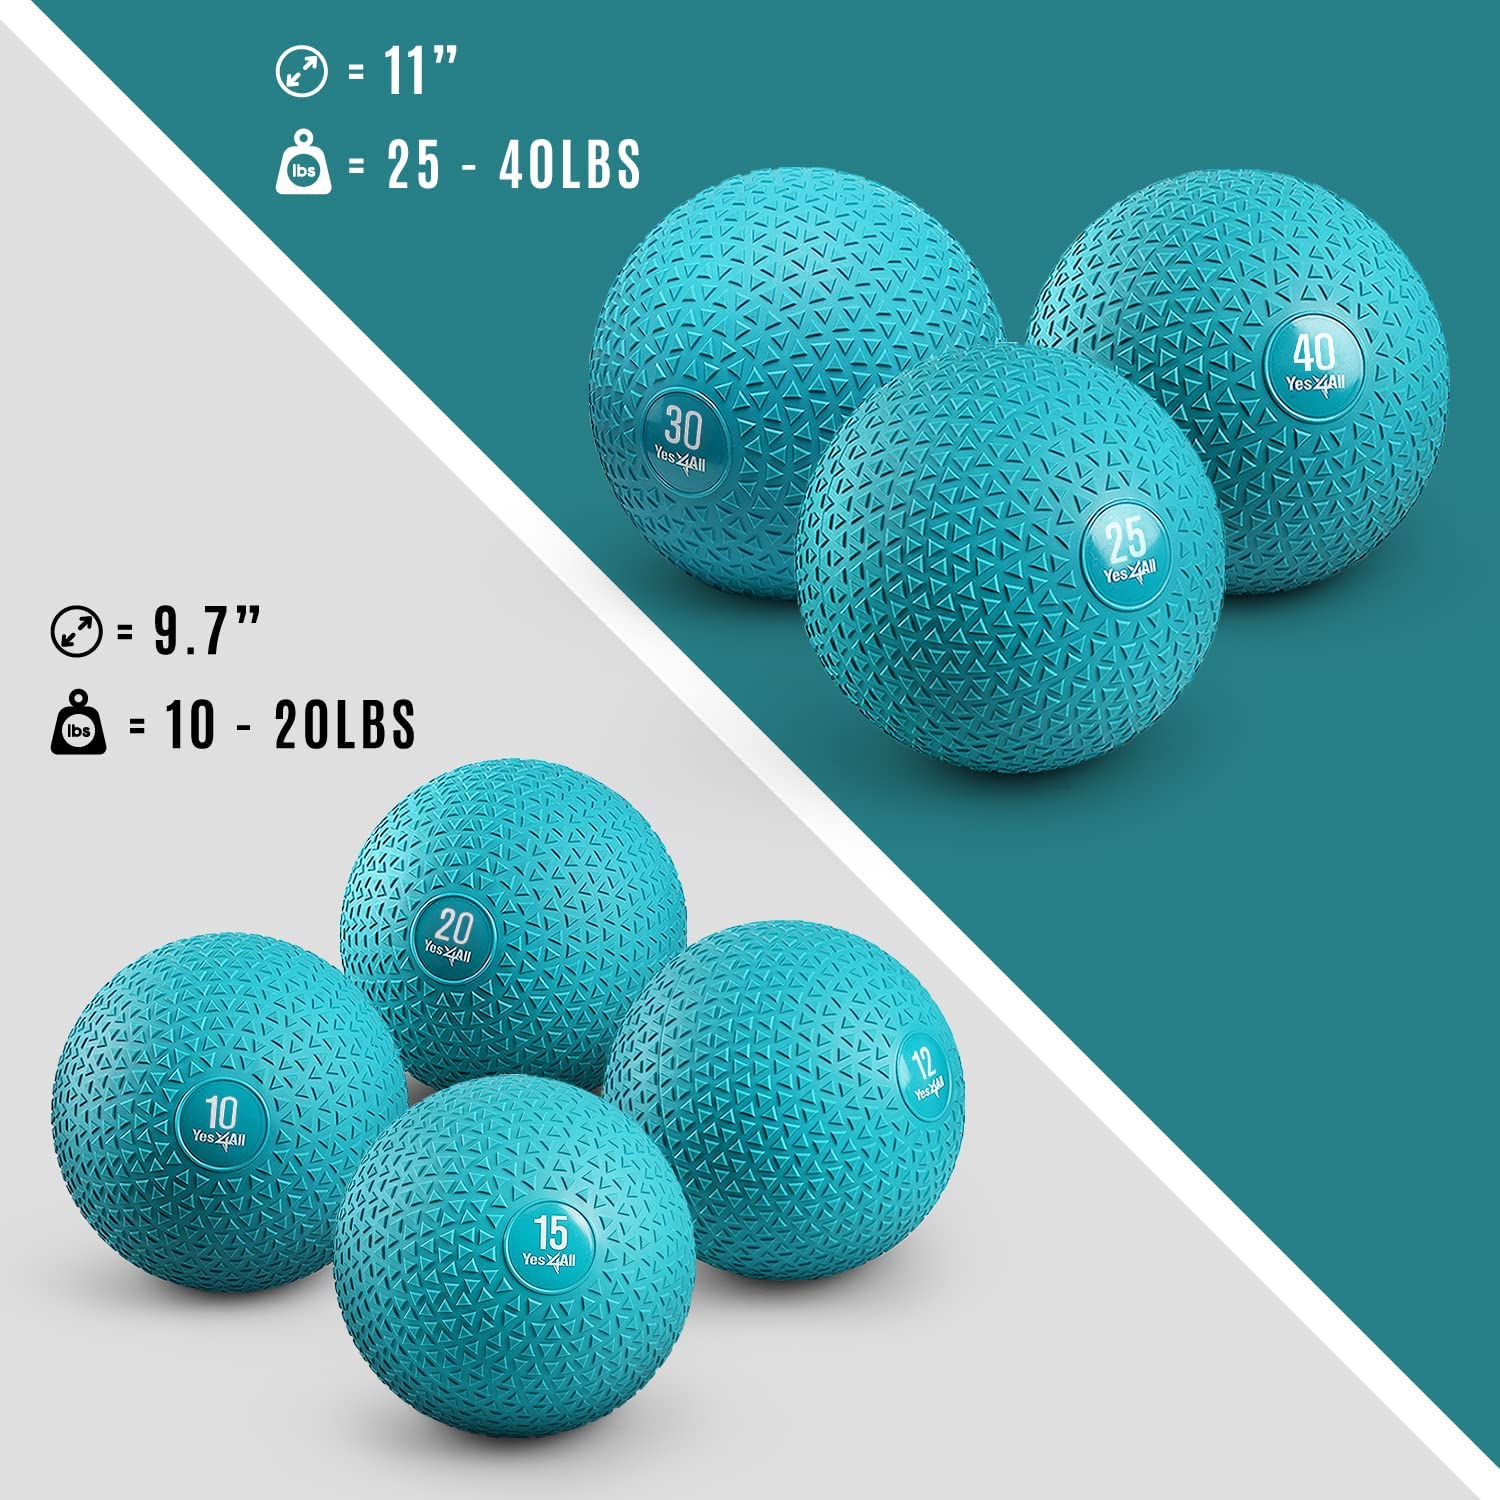 Yes4All 40lbs Slam Medicine Ball Triangle Teal - image 4 of 8